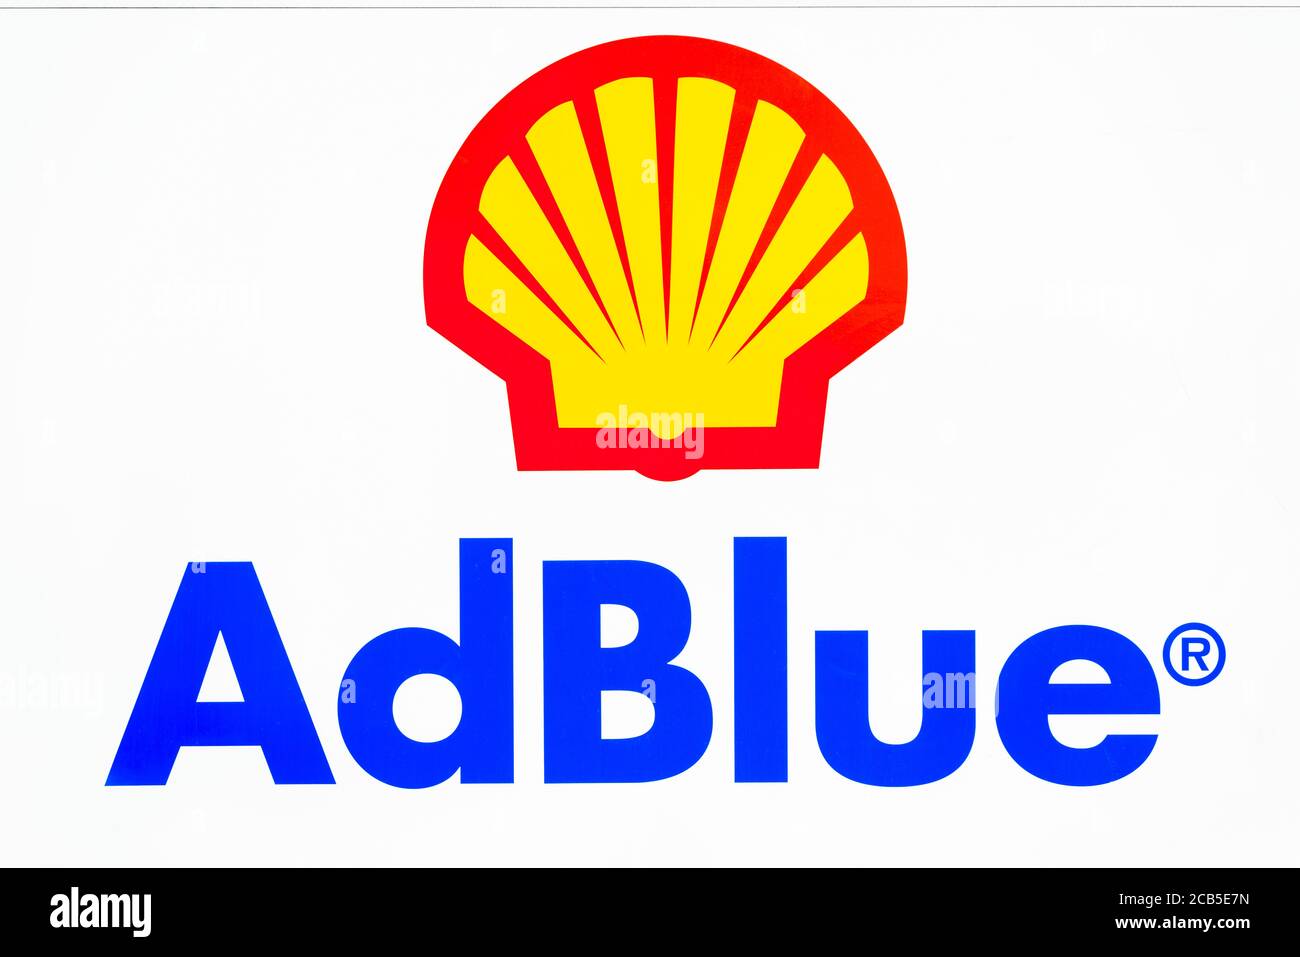 Portrait Of Shell Diesel Logo And Adblue Stock Photo Alamy